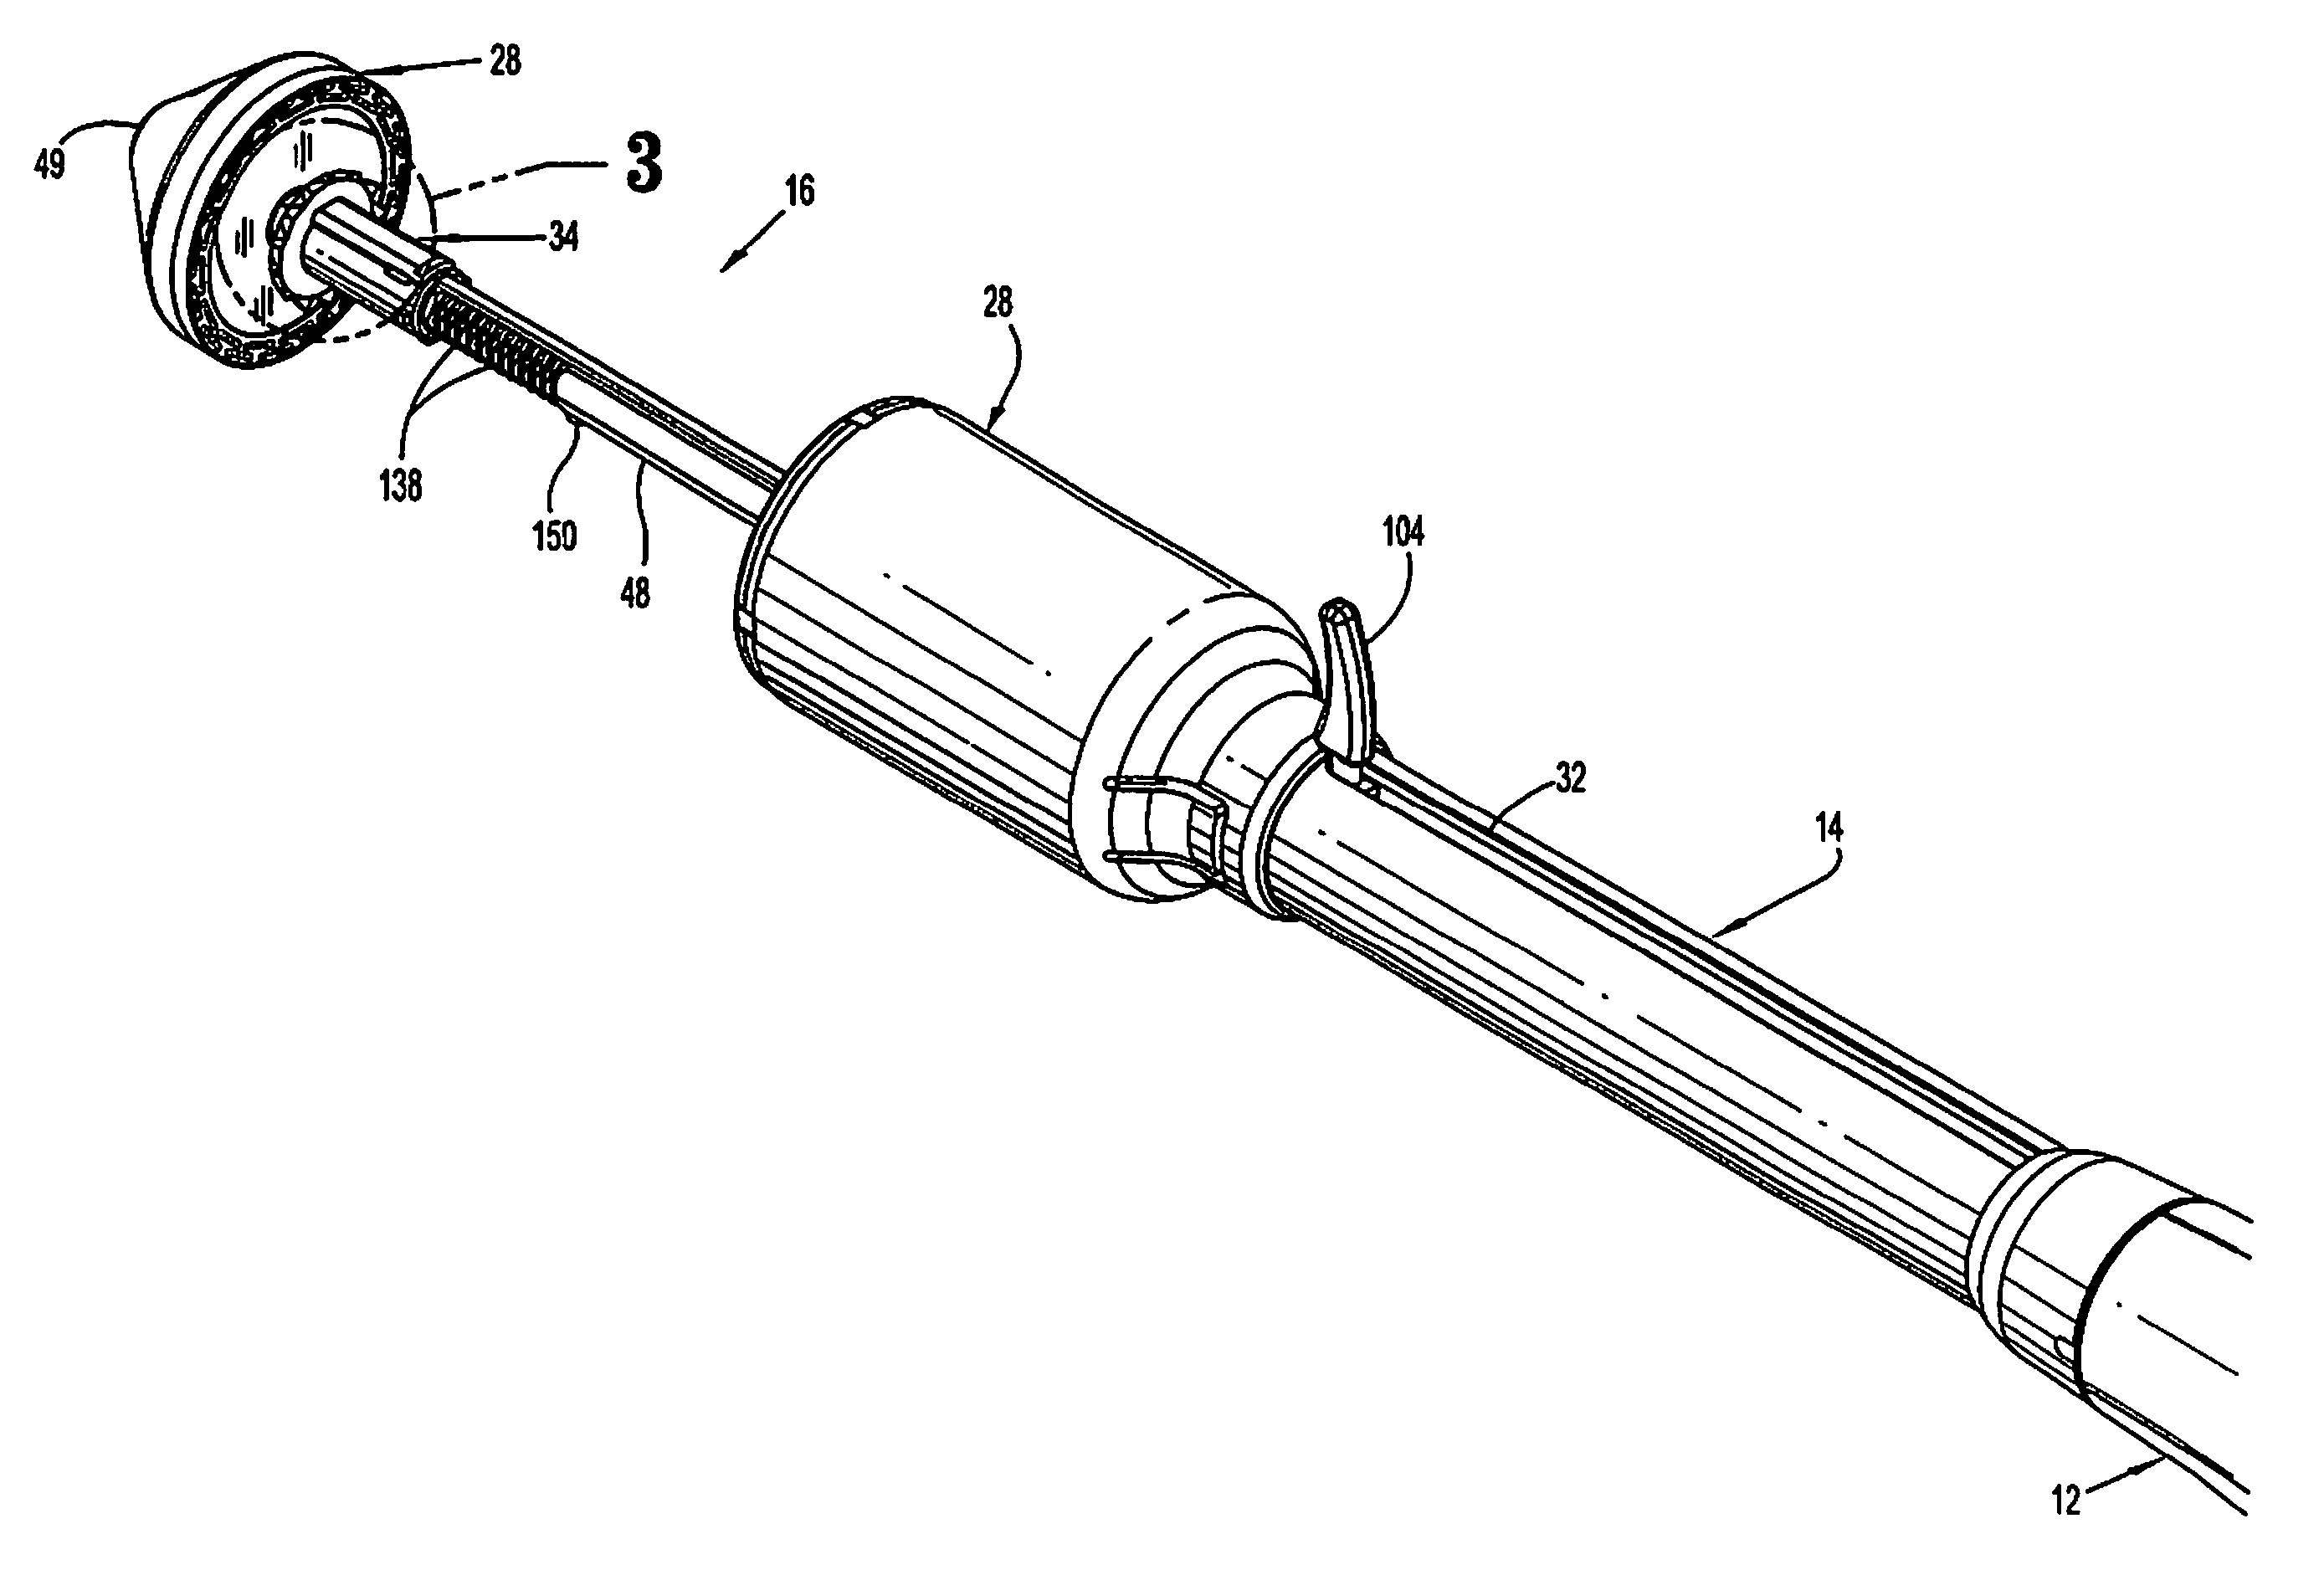 Tissue tensioner assembly and approximation mechanism for surgical stapling device